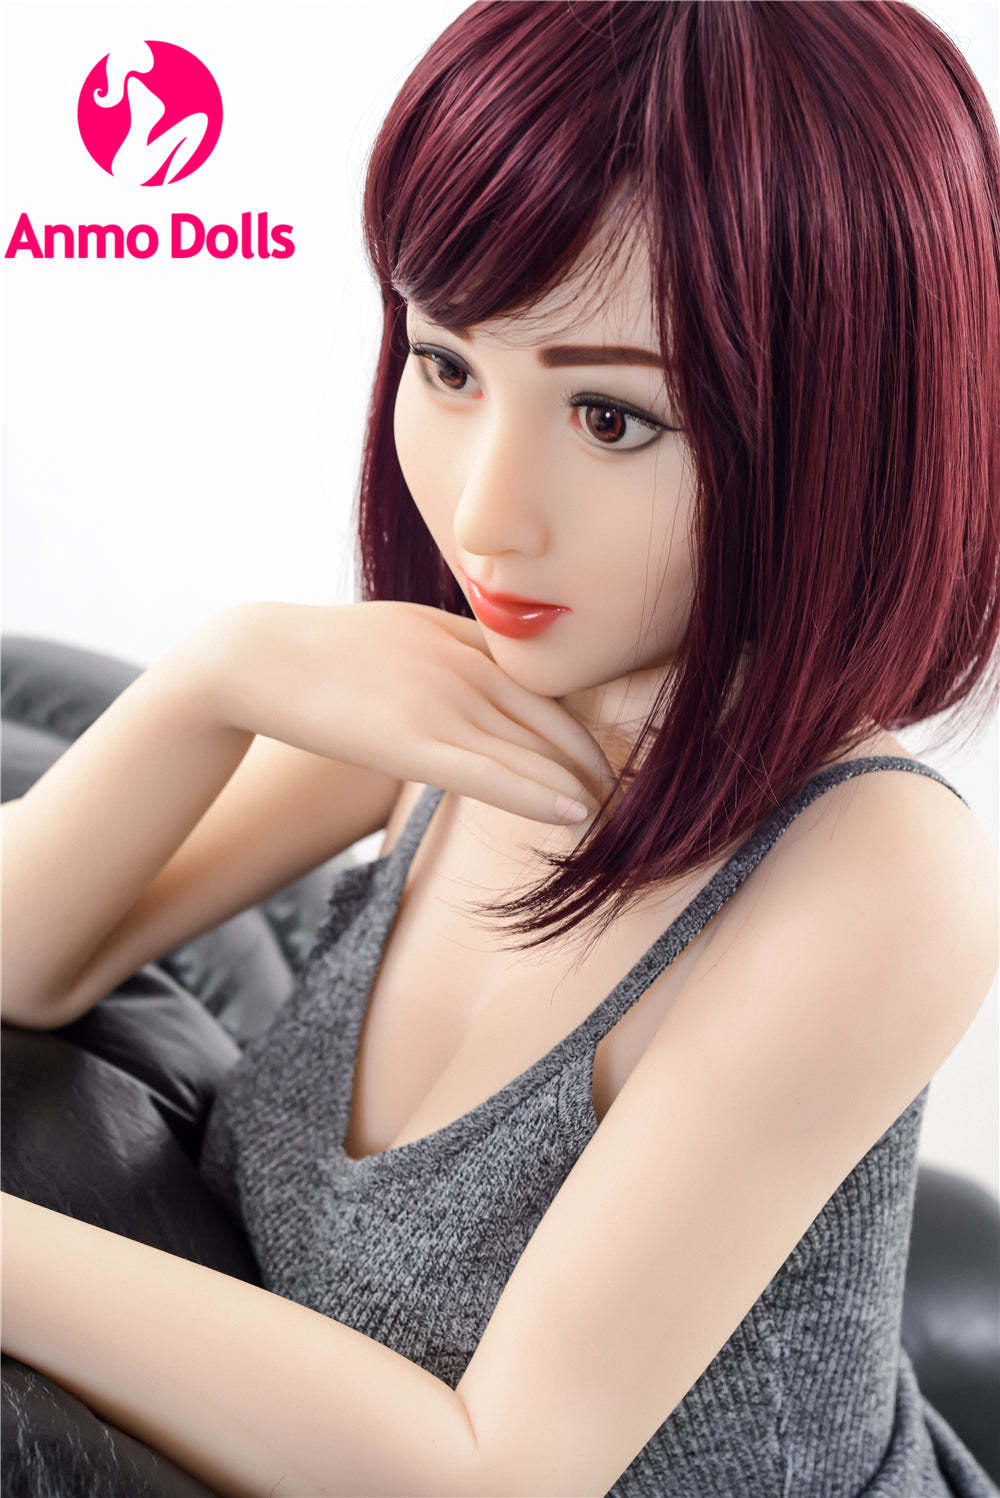 Lacie - Amateur Chinese Model Sex Doll by Anmodolls